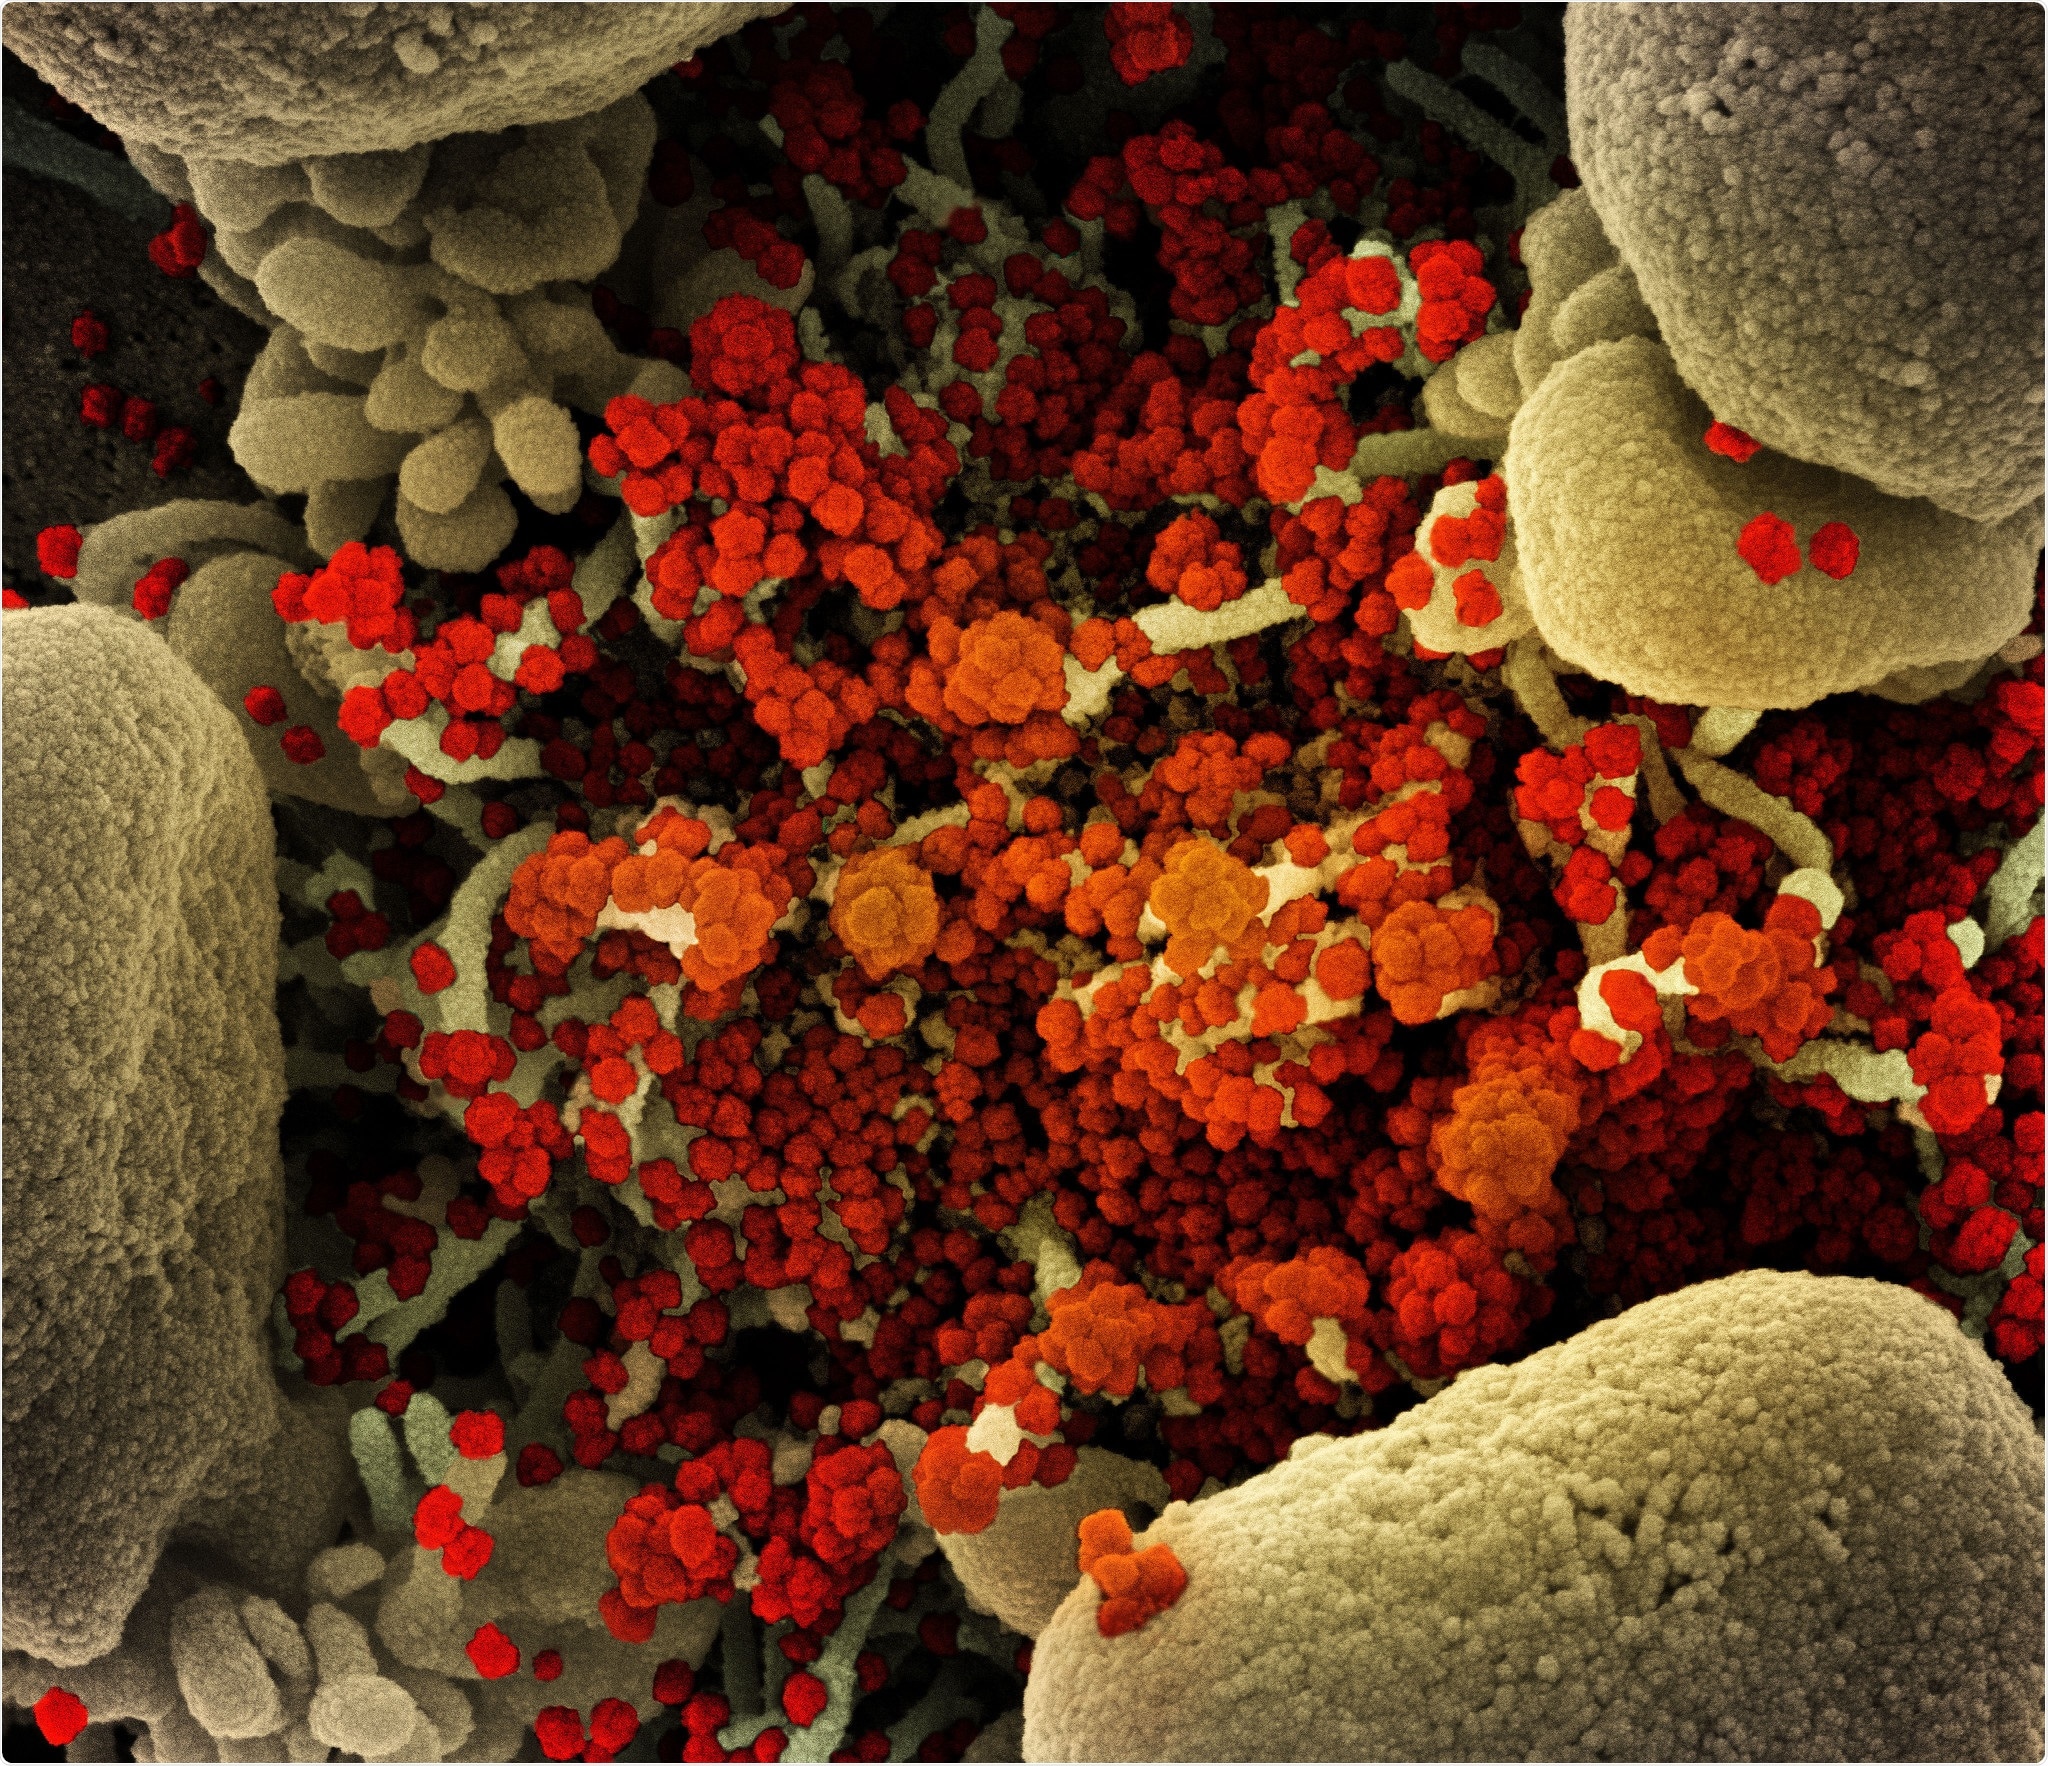 Novel Coronavirus SARS-CoV-2 Colorized scanning electron micrograph of an apoptotic cell (tan) heavily infected with SARS-CoV-2 virus particles (orange), isolated from a patient sample. Image captured at the NIAID Integrated Research Facility (IRF) in Fort Detrick, Maryland. Credit: NIAID